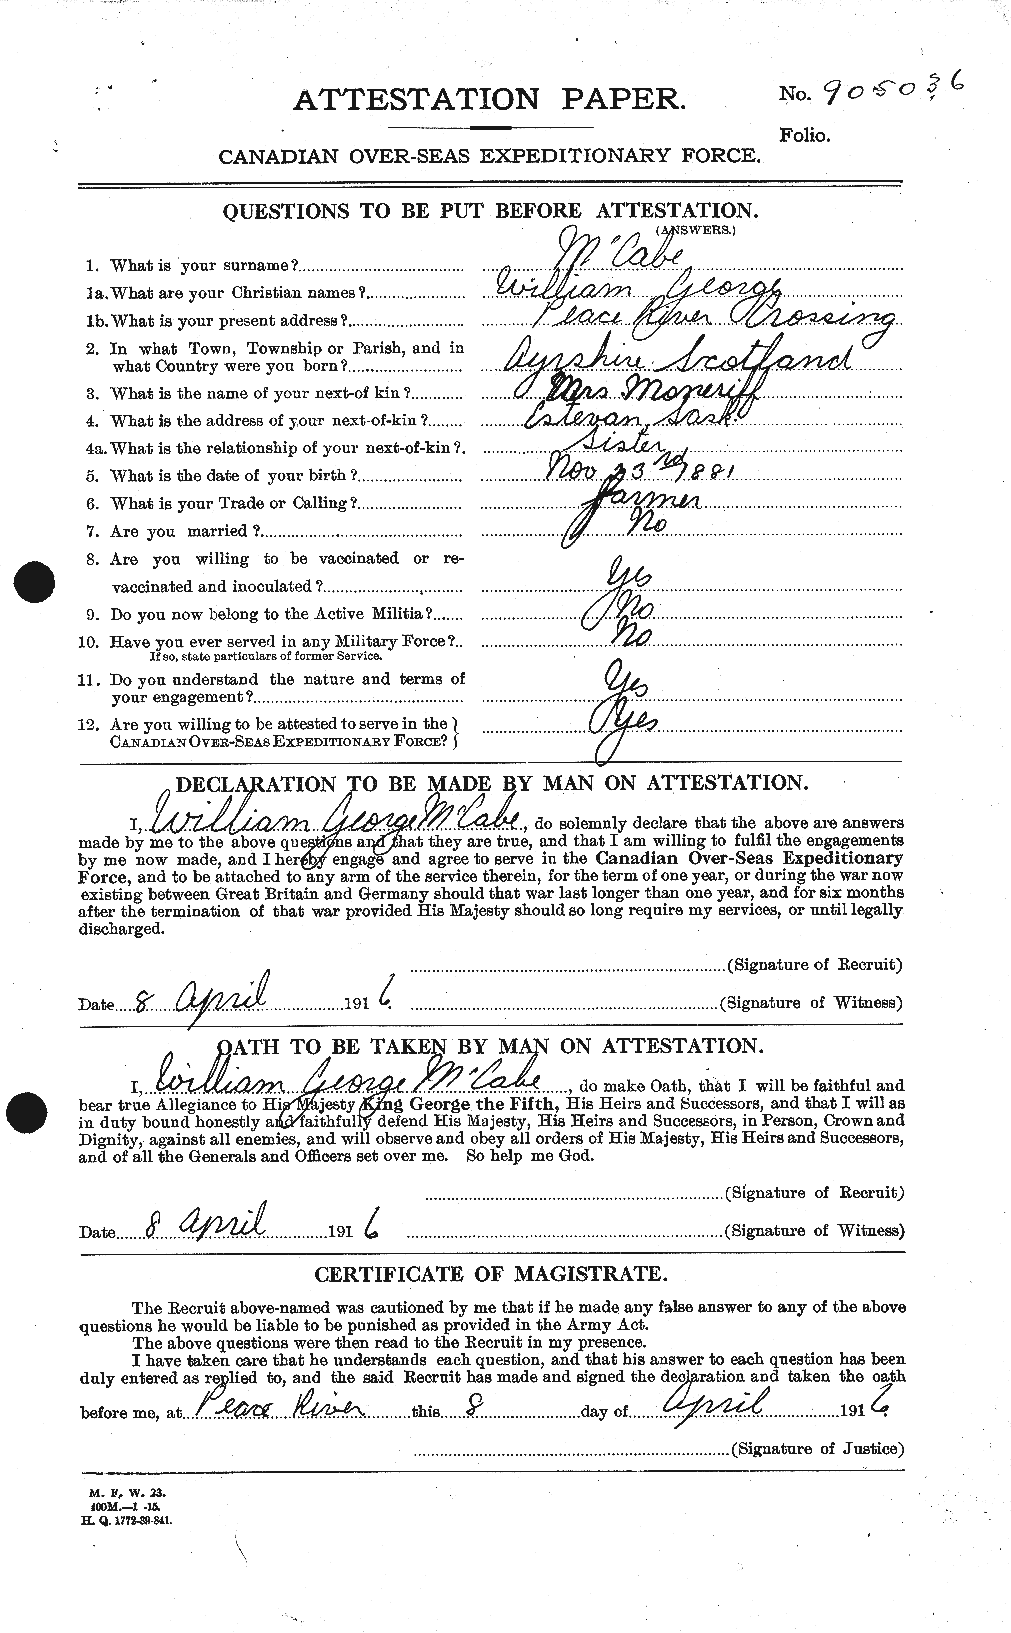 Personnel Records of the First World War - CEF 130978a